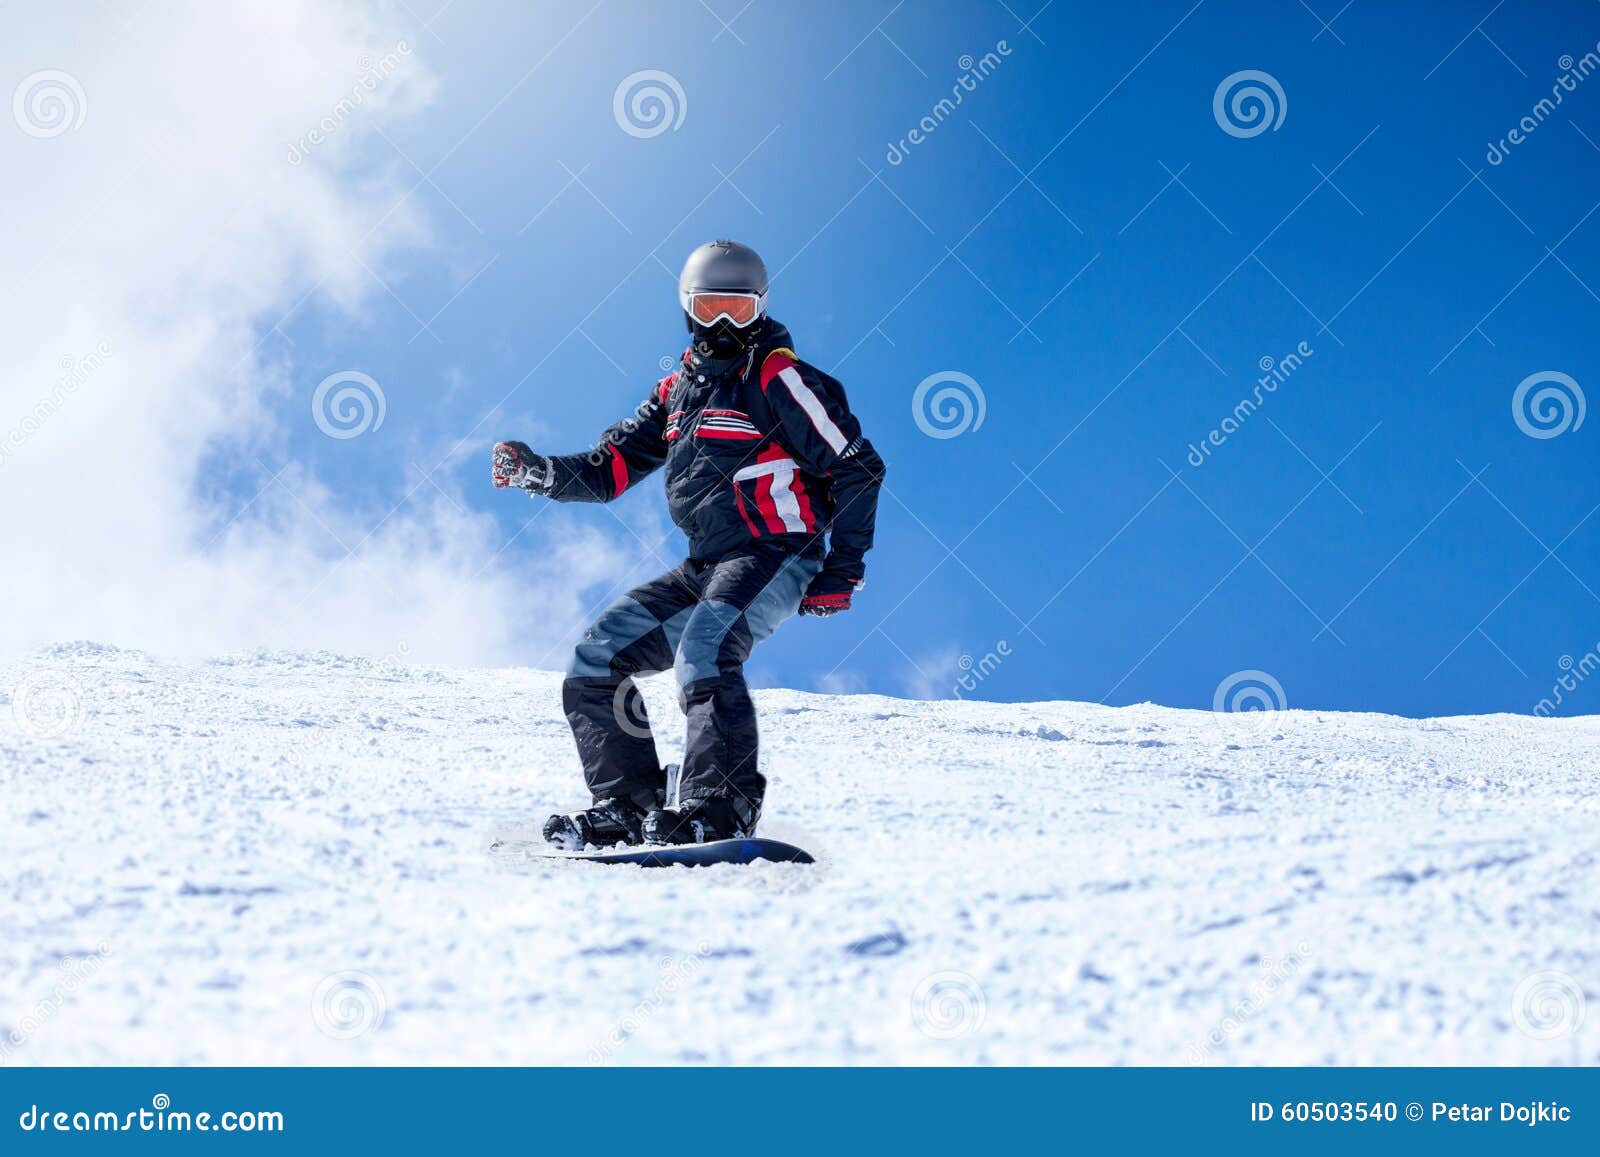 Young man snowboarding stock photo. Image of snowboard - 60503540